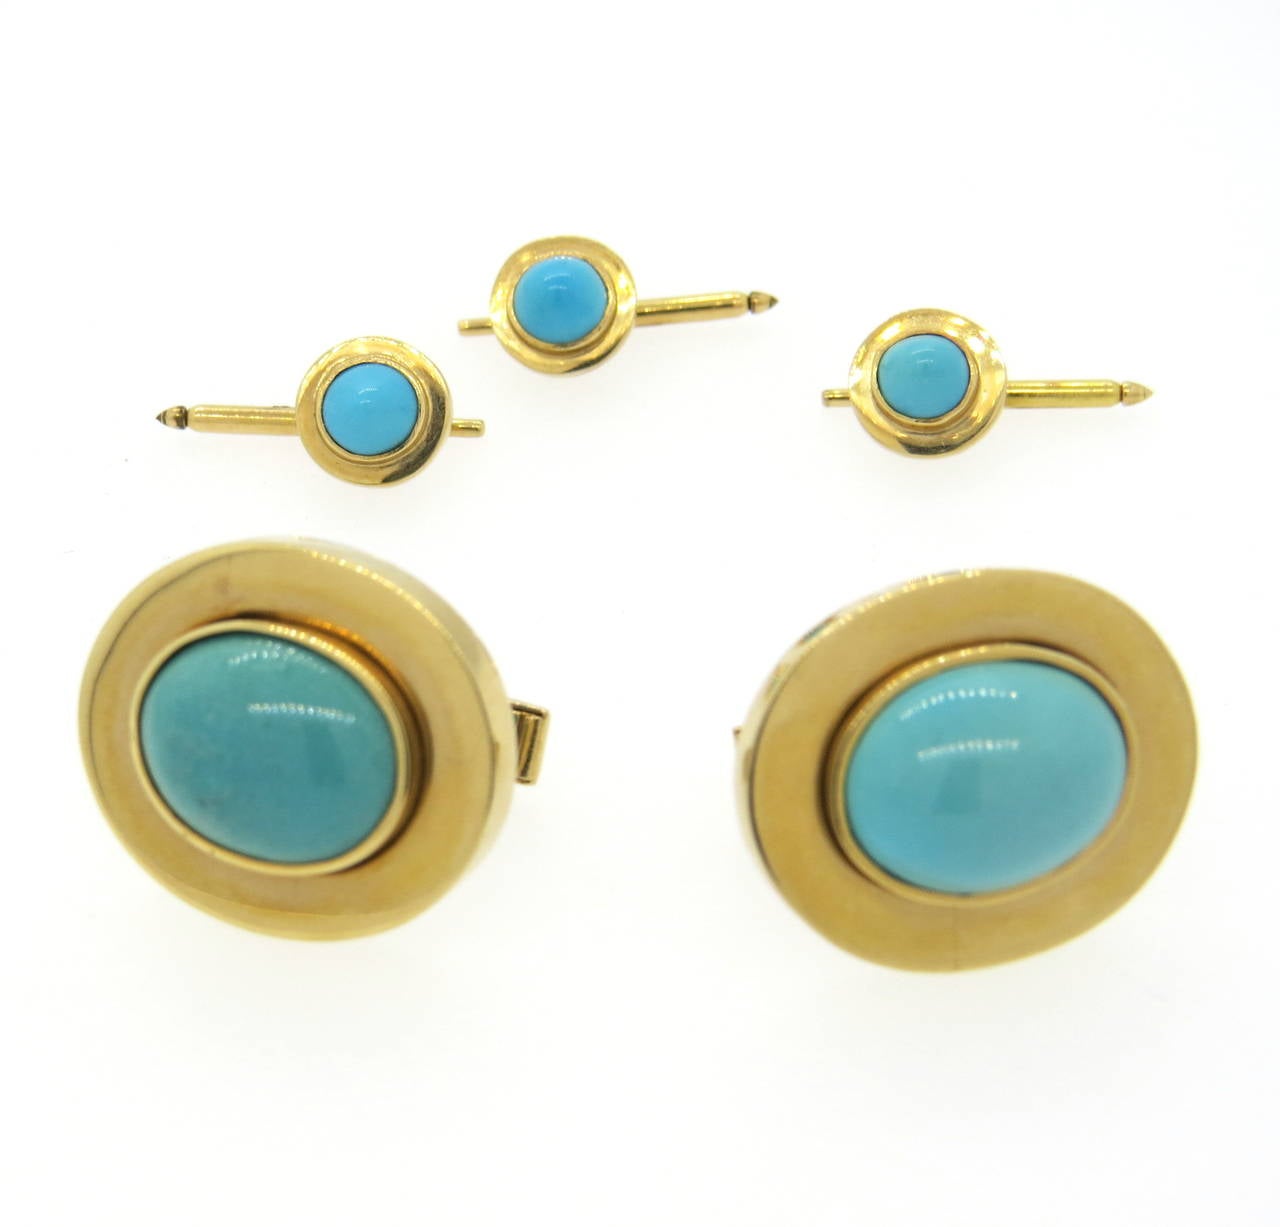 Set of massive 14k gold cufflinks and three shirt studs, set with turquoise stones. Cufflinks measure 25mm x 21mm, studs measure 10.5mm in diameter. Weight of the set - 43.7 grams